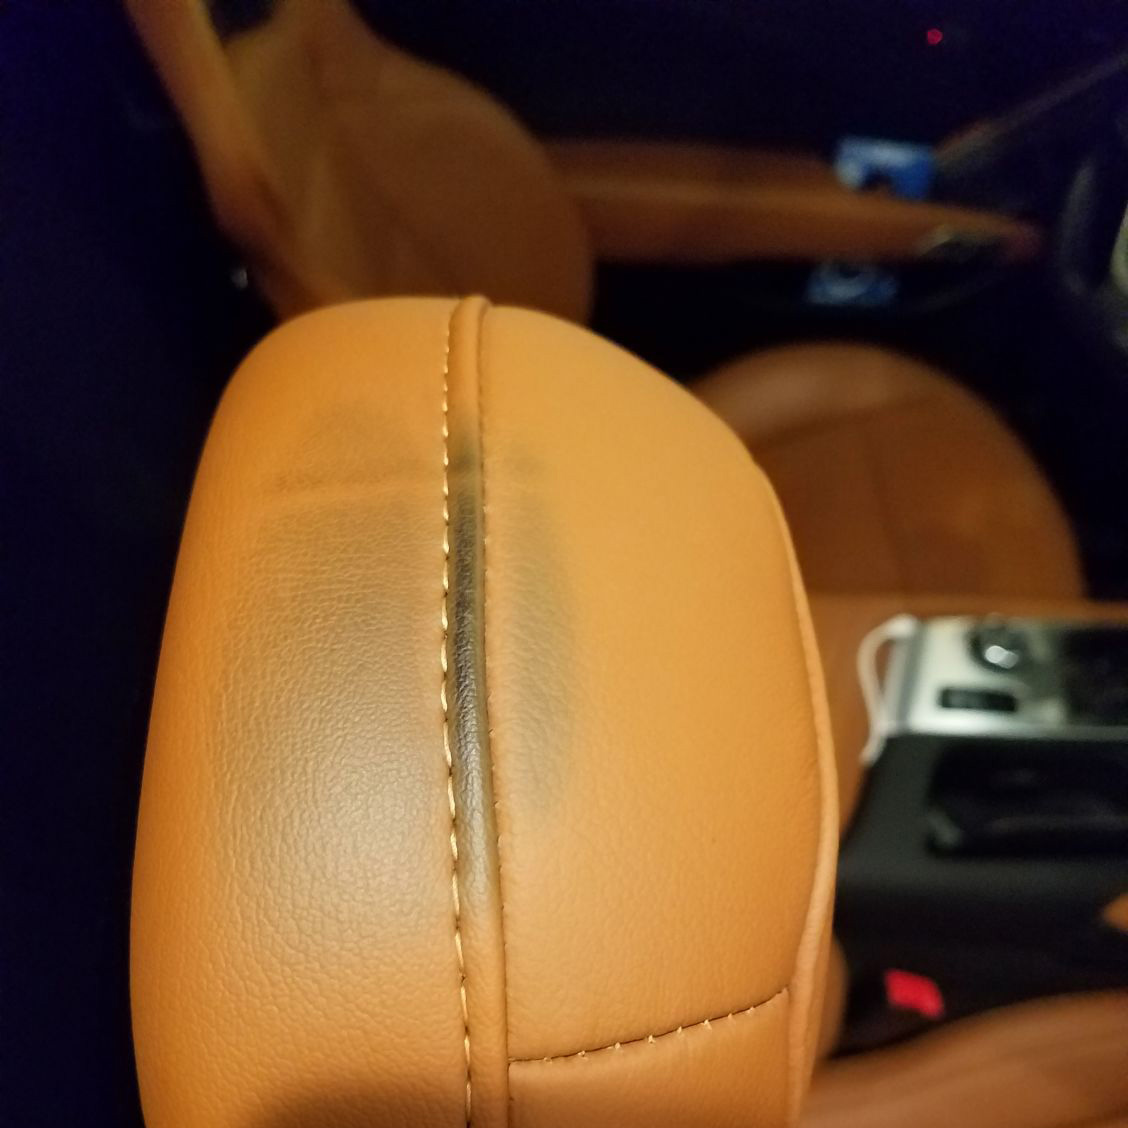 Dye Transfer on C7 Corvette Seats: Flaw or Just Reality?